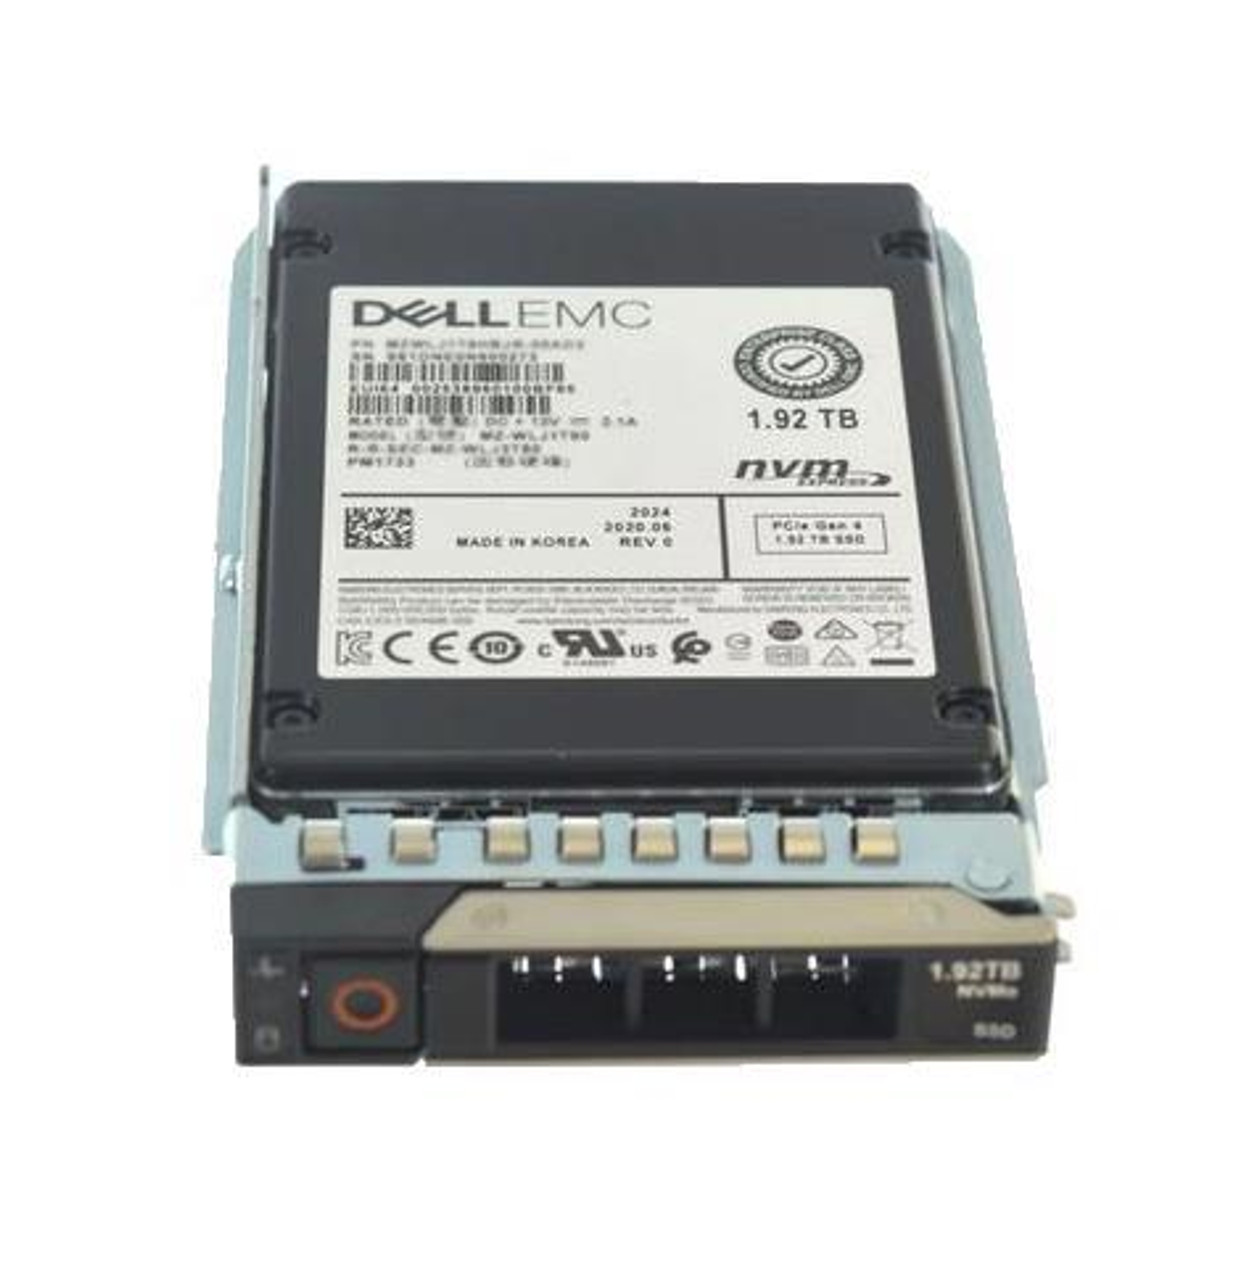 400-BHCV Dell 1.92TB PCI Express NVMe (SED) 2.5-inch Internal Solid State Drive (SSD) for P1 25 x 2.5 Enclosure